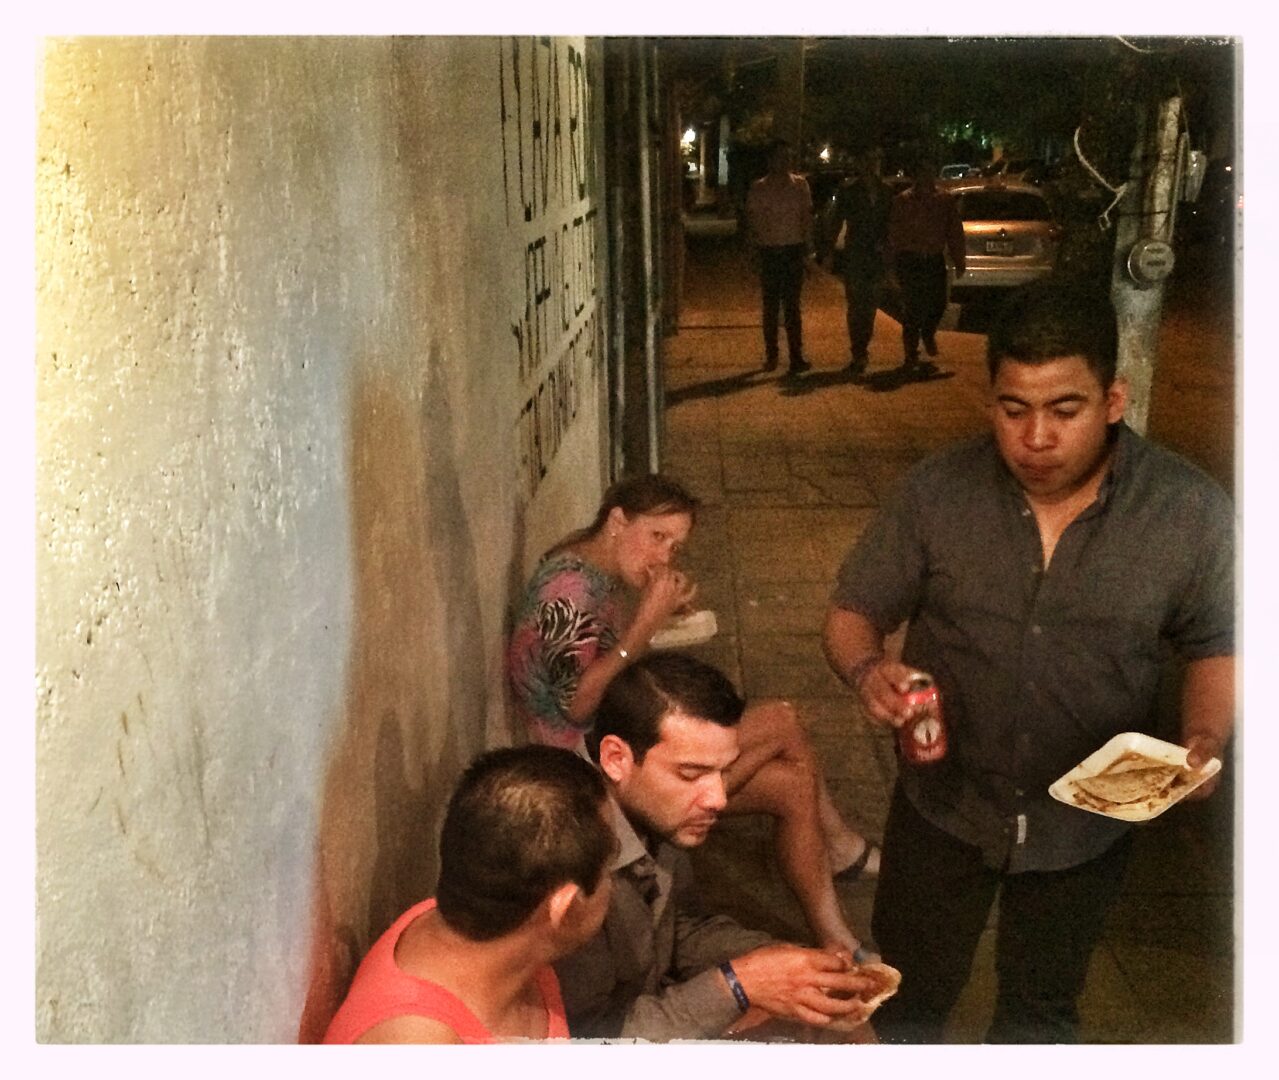 A group of people sitting on a sidewalk eating food.